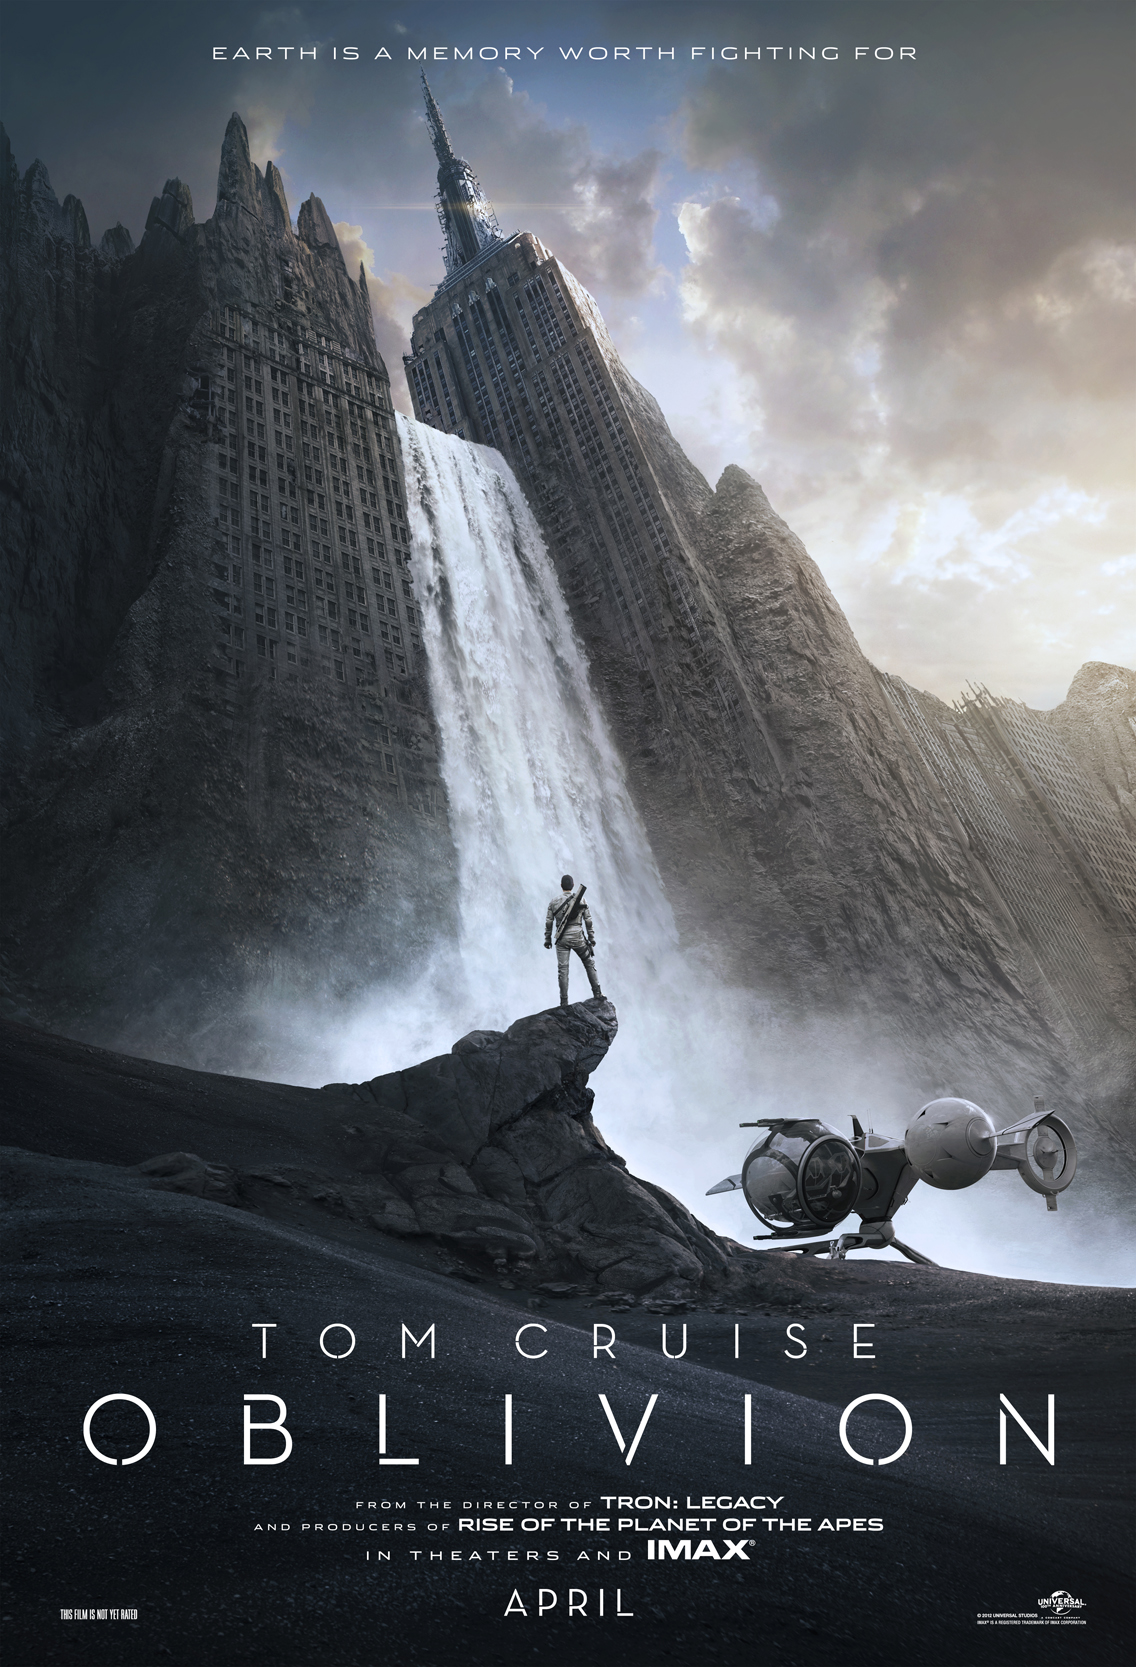 Tom Cruise Encounters a Dystopian New York City In First Poster For 'Oblivion'1136 x 1667